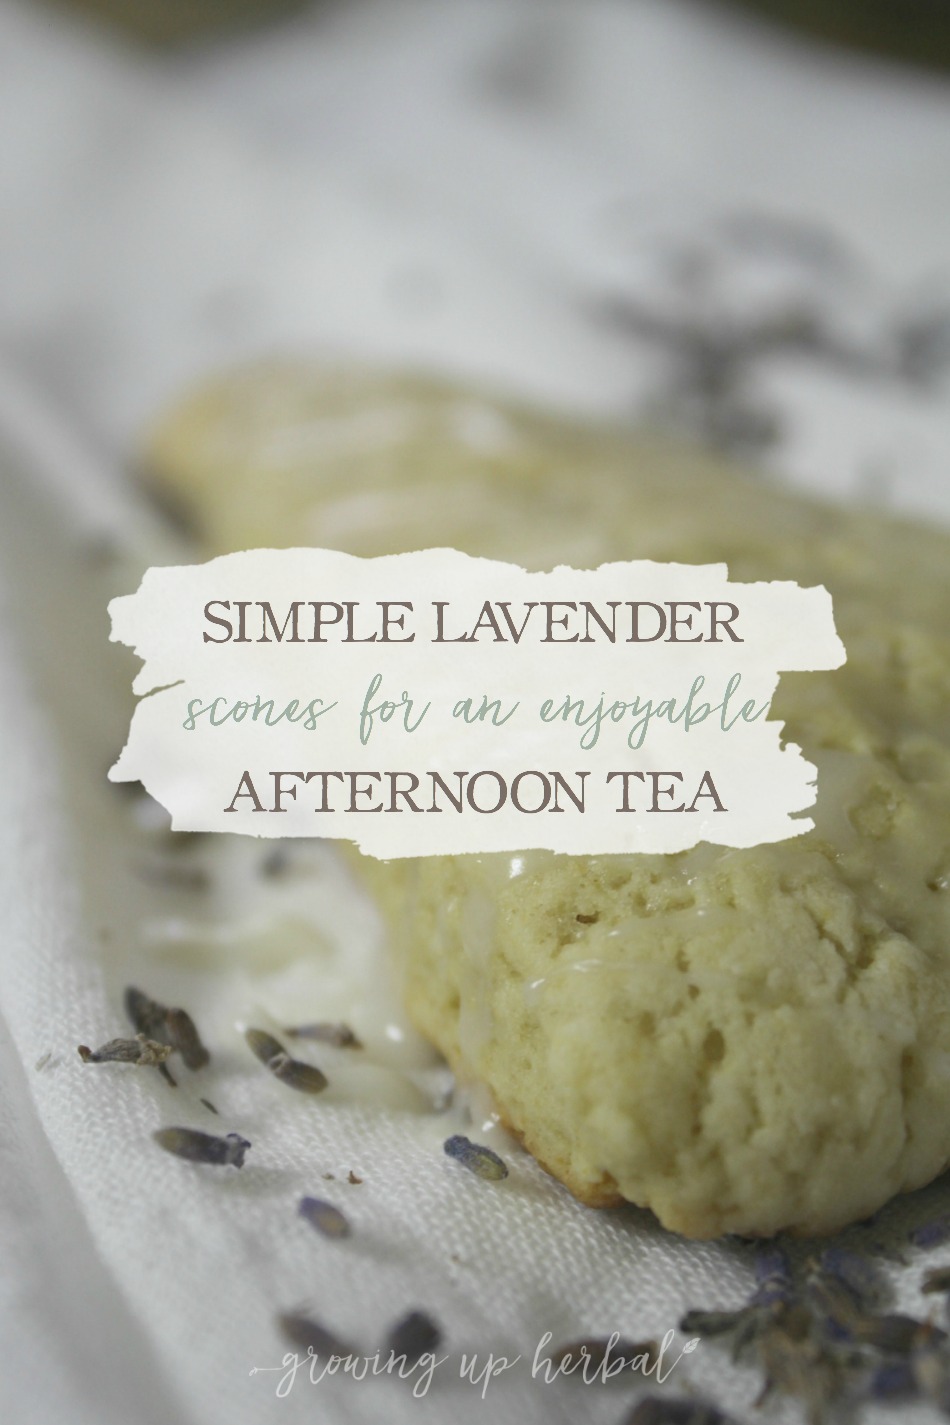 Simple Lavender Scones for an Enjoyable Afternoon Tea | Growing Up Herbal | These tasty lavender scones are easy to make and are a perfect treat for afternoon tea!